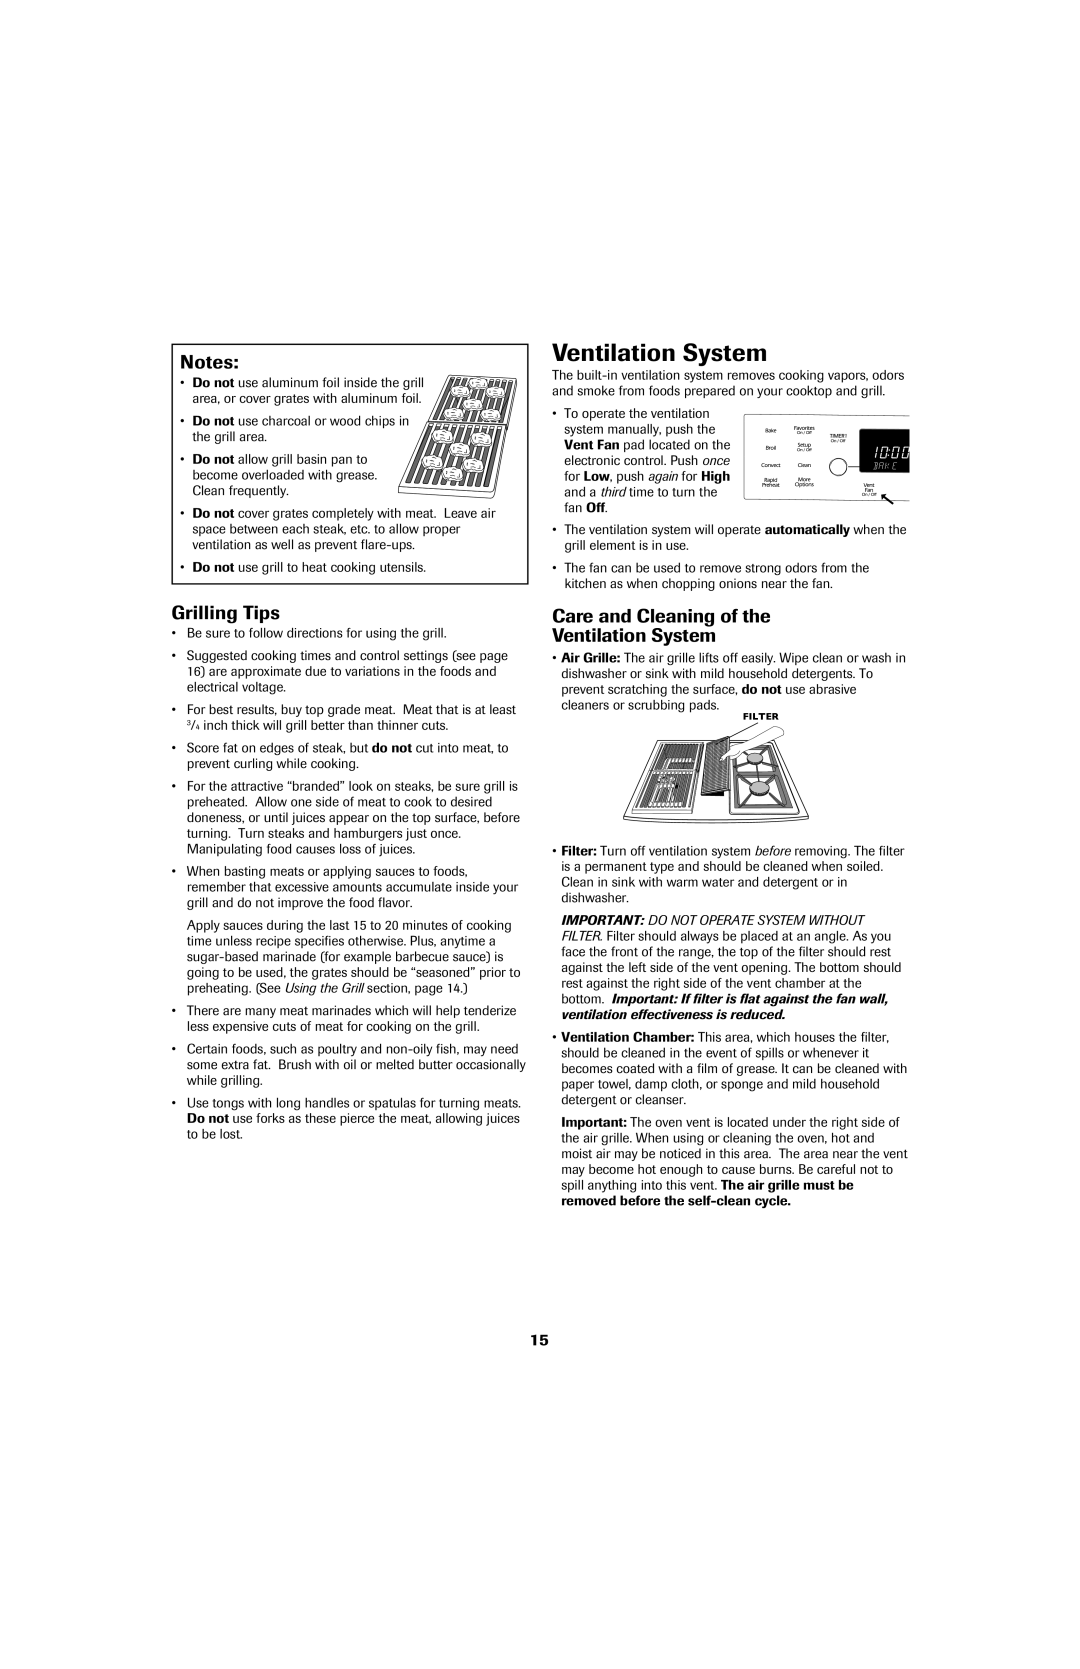 Jenn-Air 8113P753-60 important safety instructions Grilling Tips, Care and Cleaning of the Ventilation System, Notes 